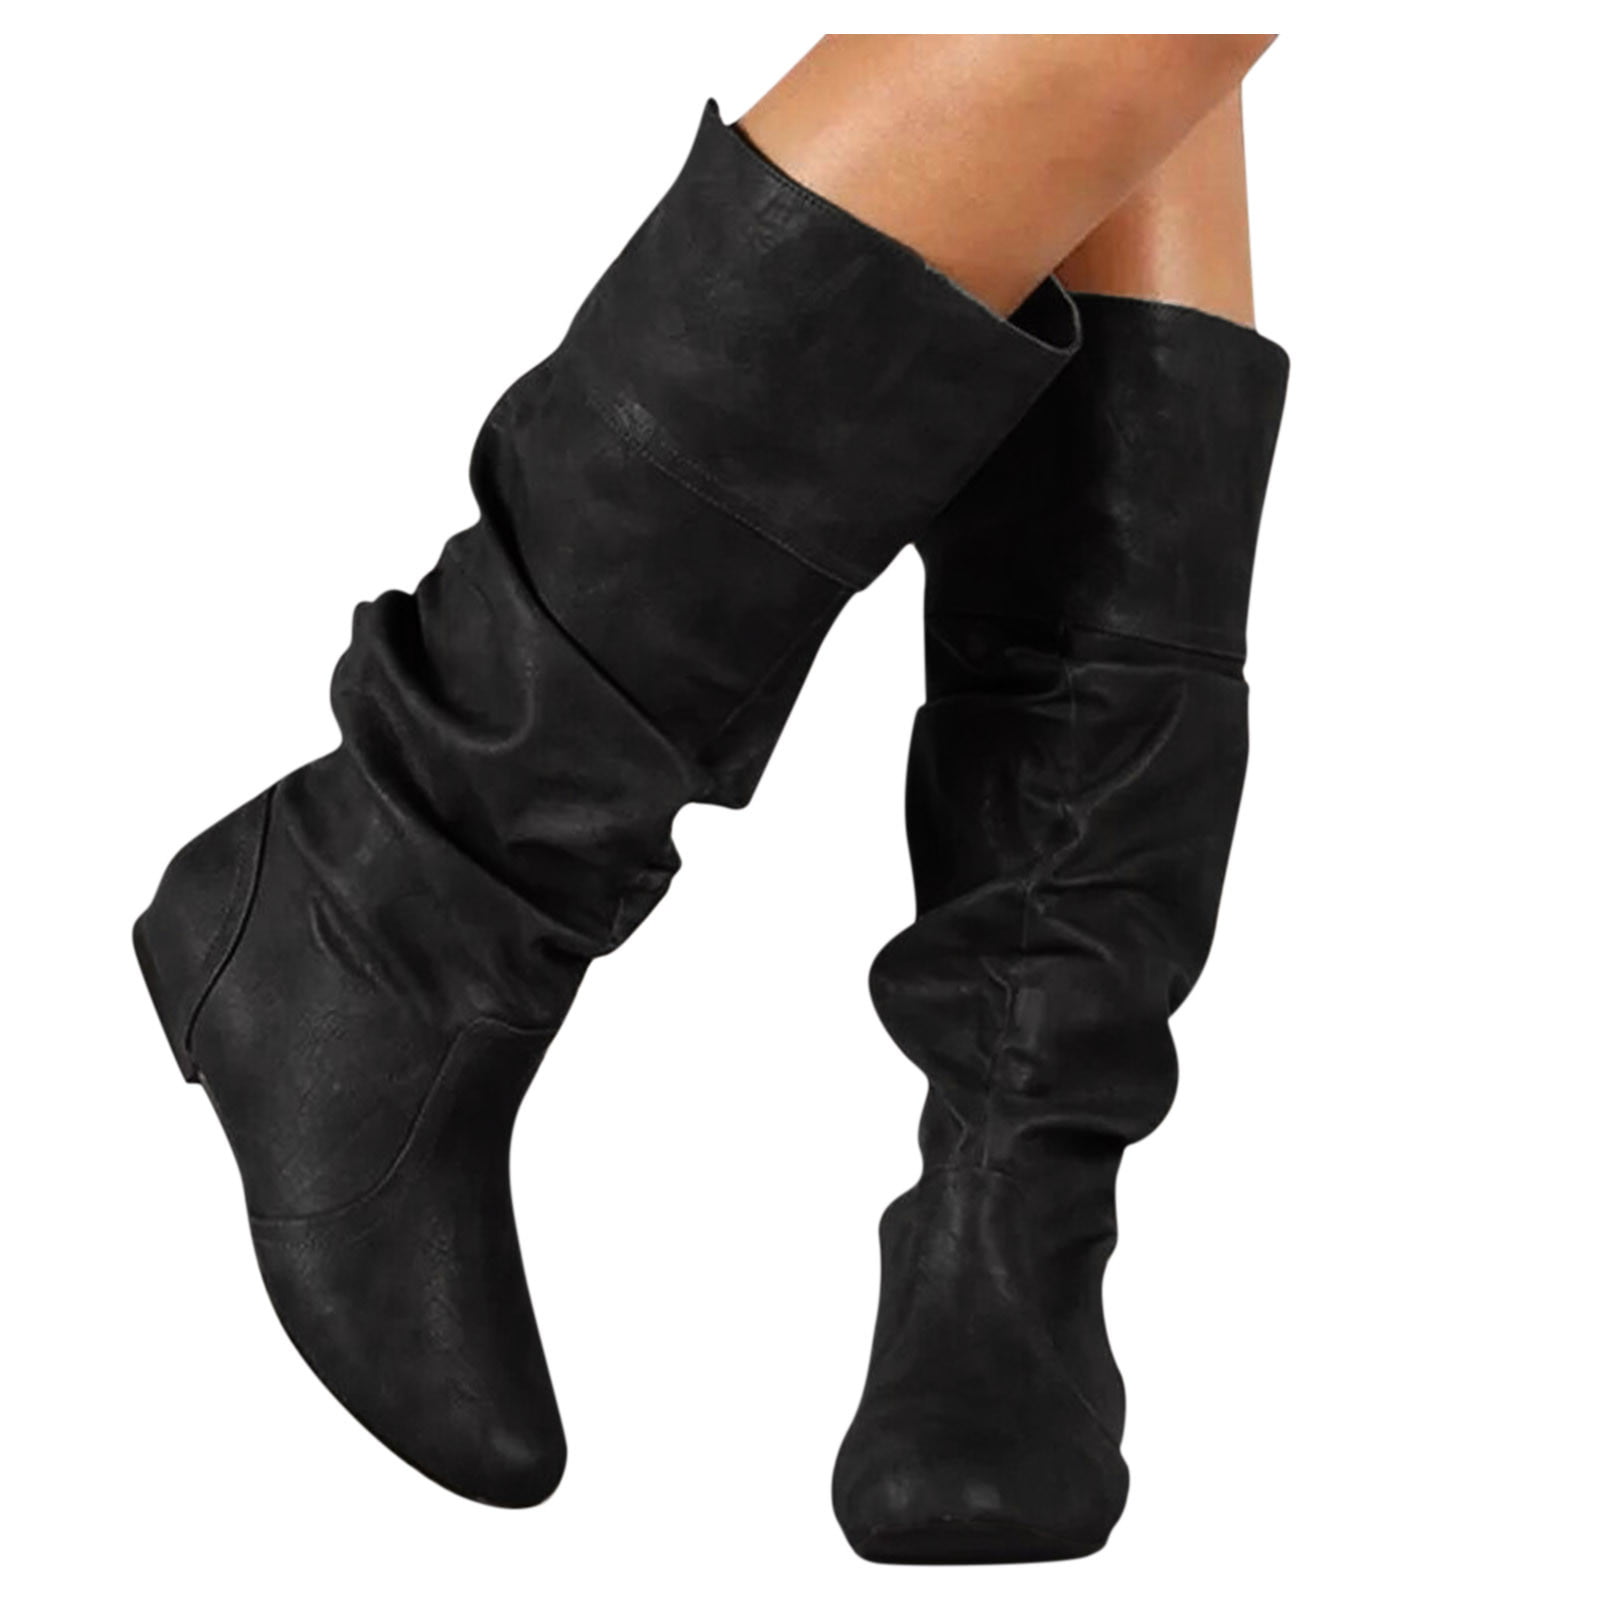 Womens Vintage Faux Suede Strappy Knee High Riding Boots Hidden Wedge Heel Shoes